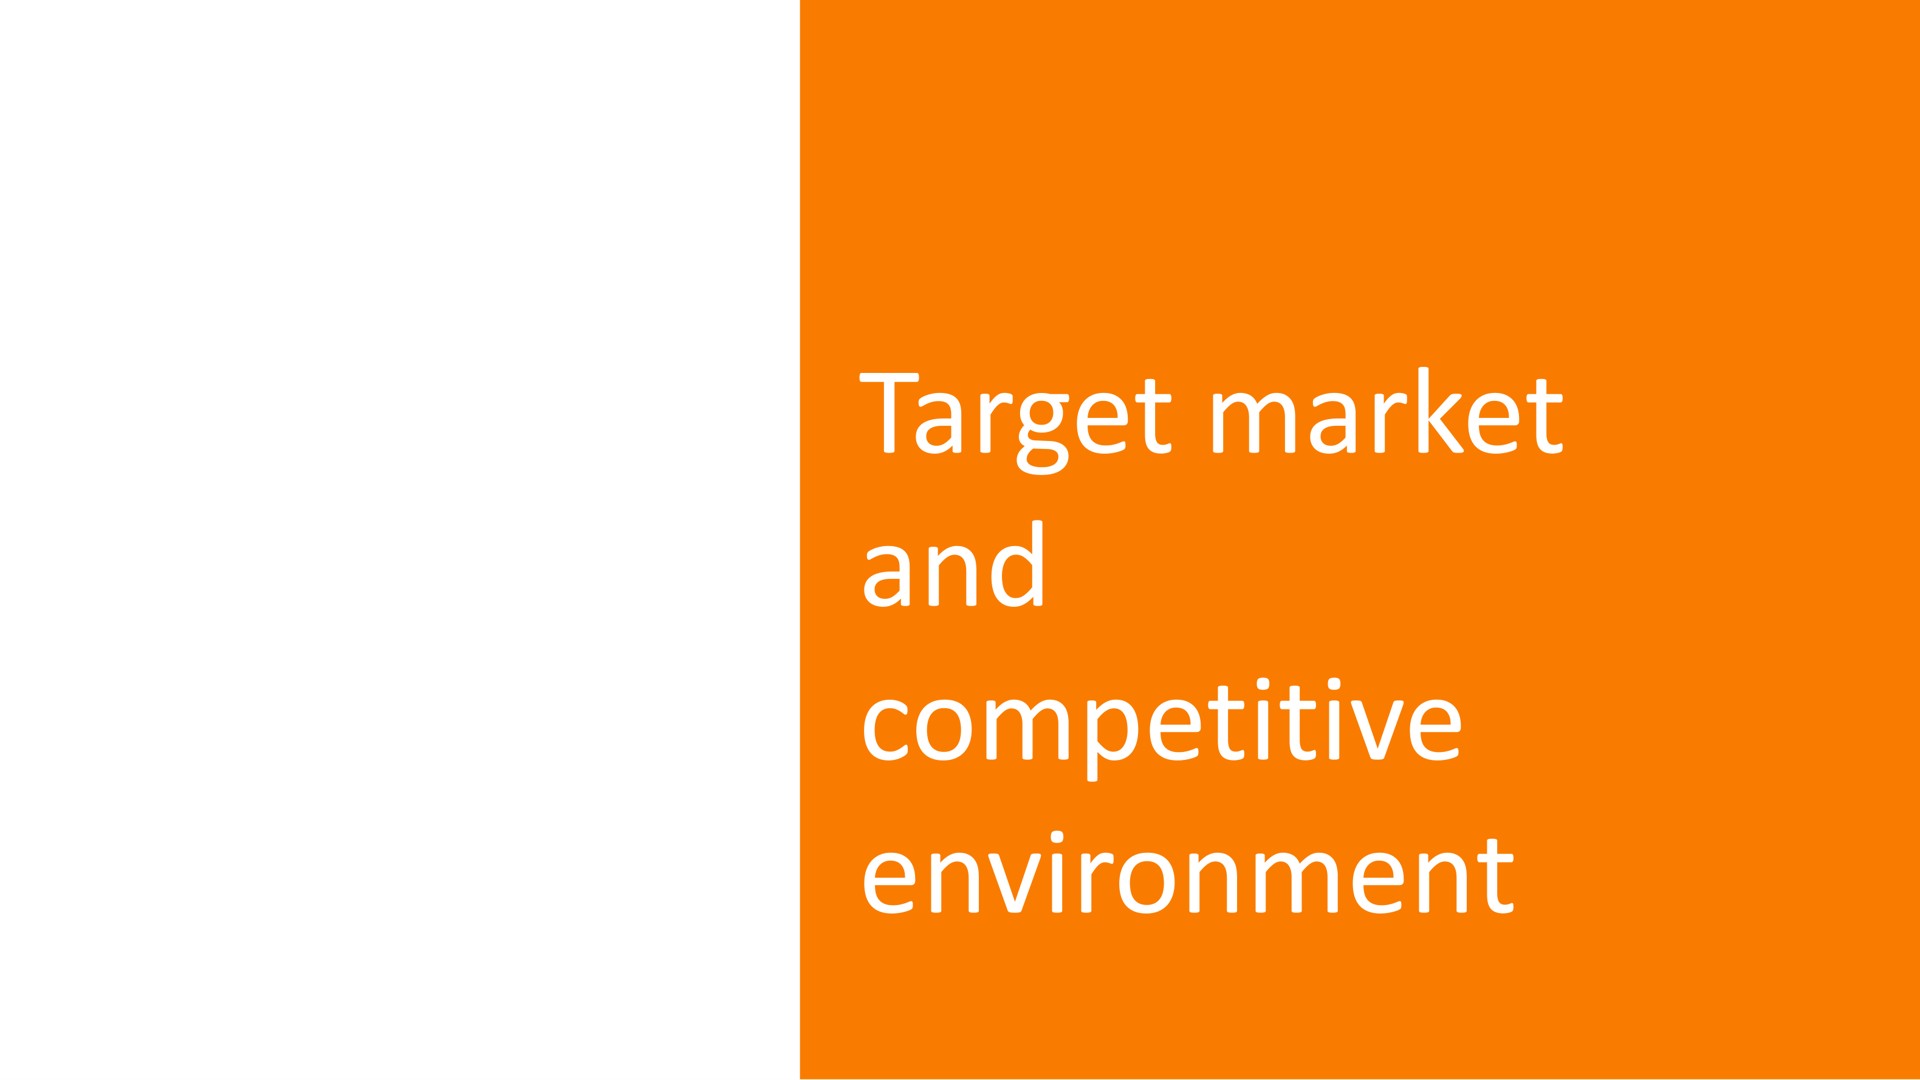 target market and competitive environment | GPI